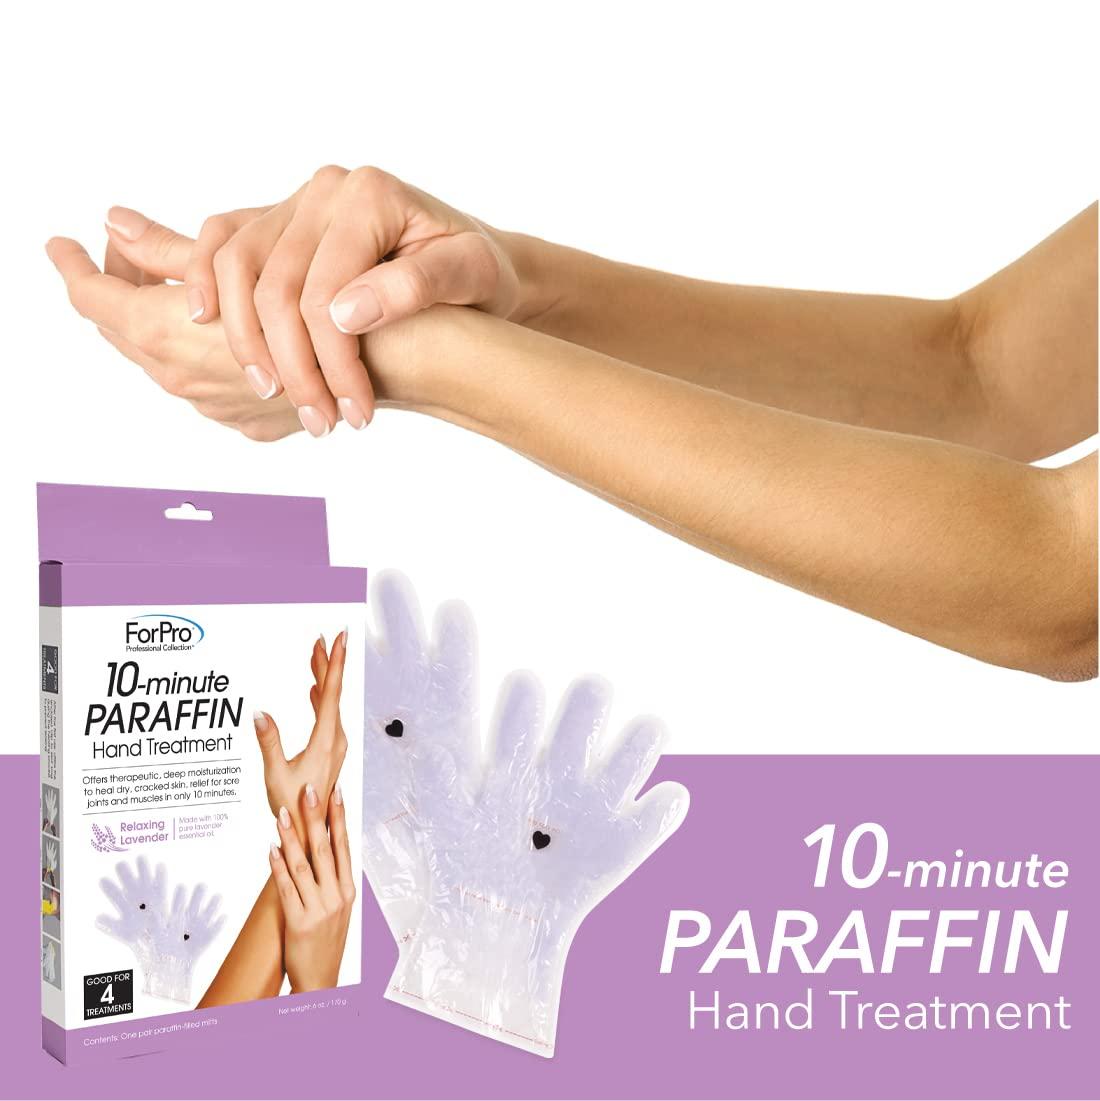 Elite Nails Hand, Foot and Body Spa: Benefits of Paraffin Treatment